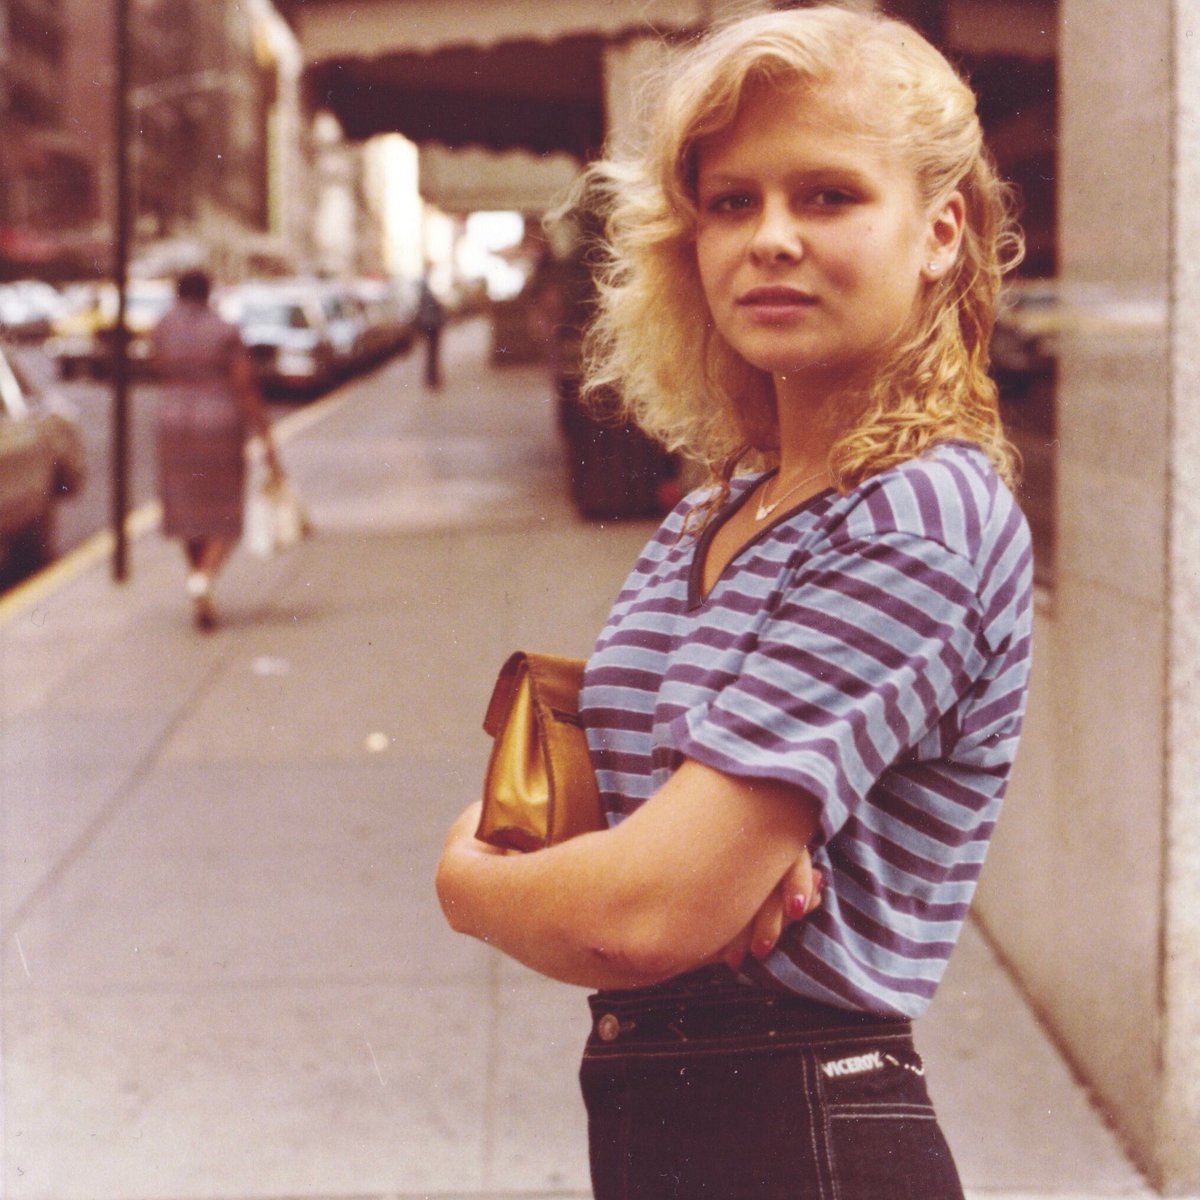 15-years-old and ready to take on the world! 😊 New York 1980 #throwback #backtothe80s 